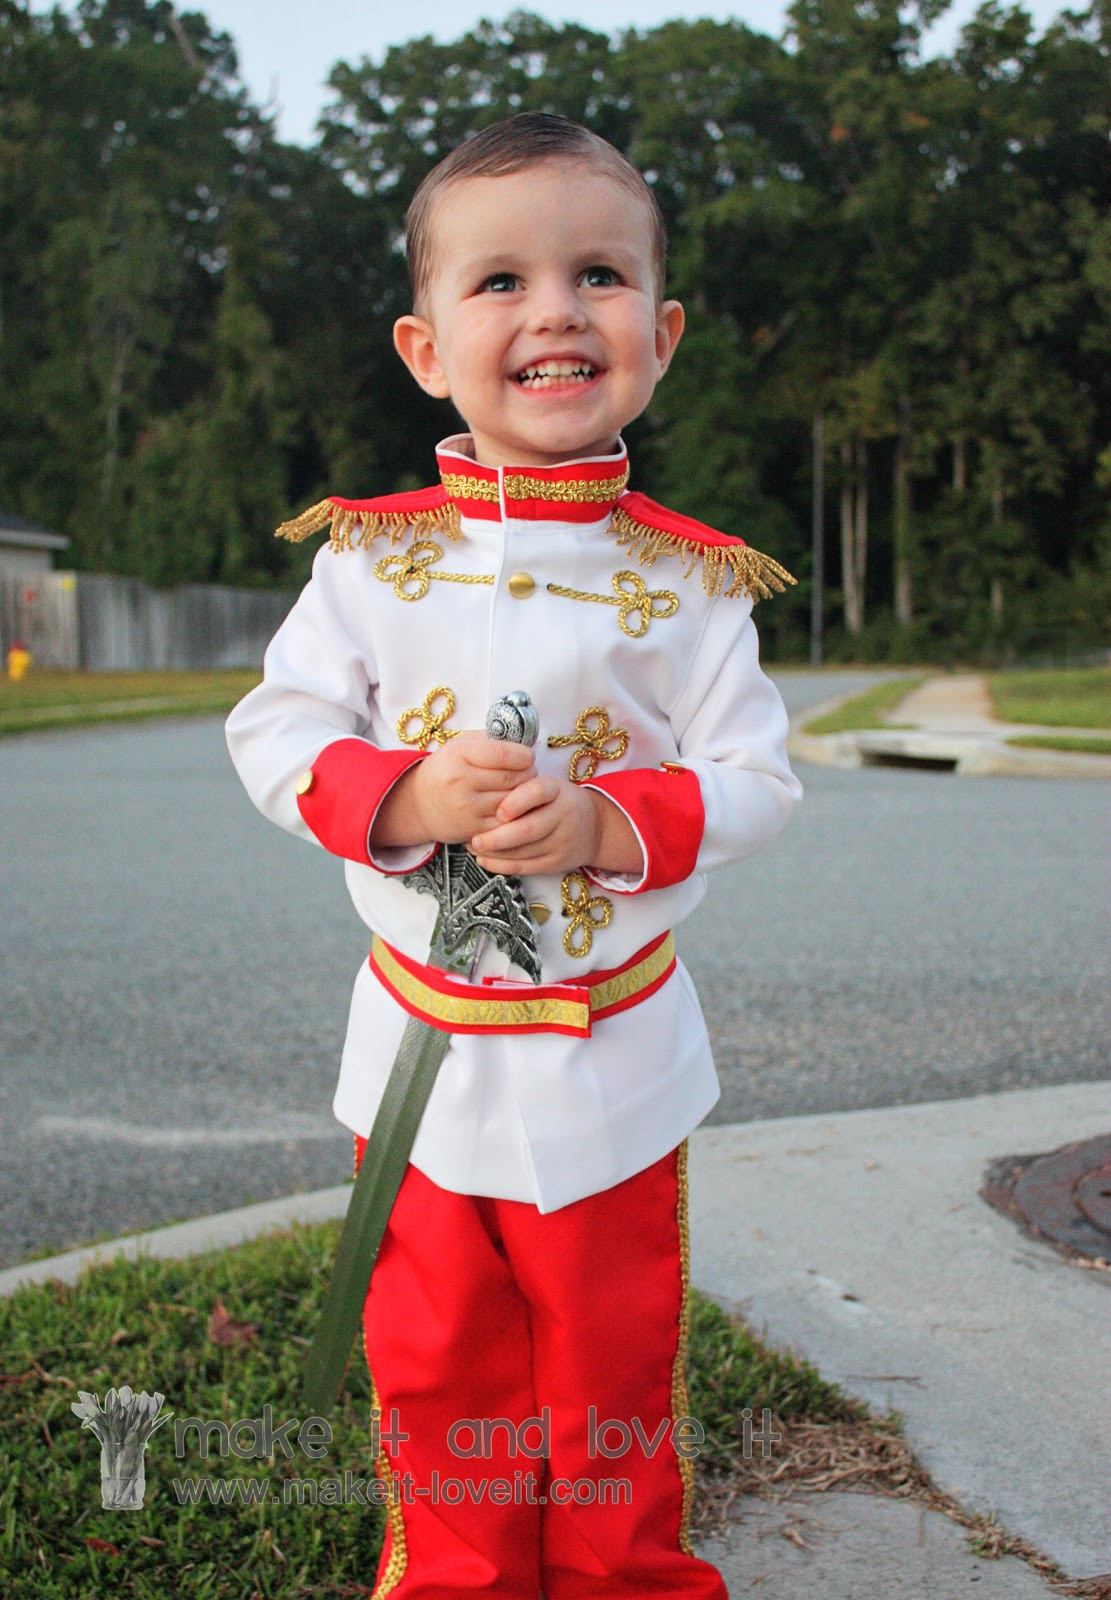 DIY Boys Costumes
 Prince Charming Costume Tutorial from Cinderella